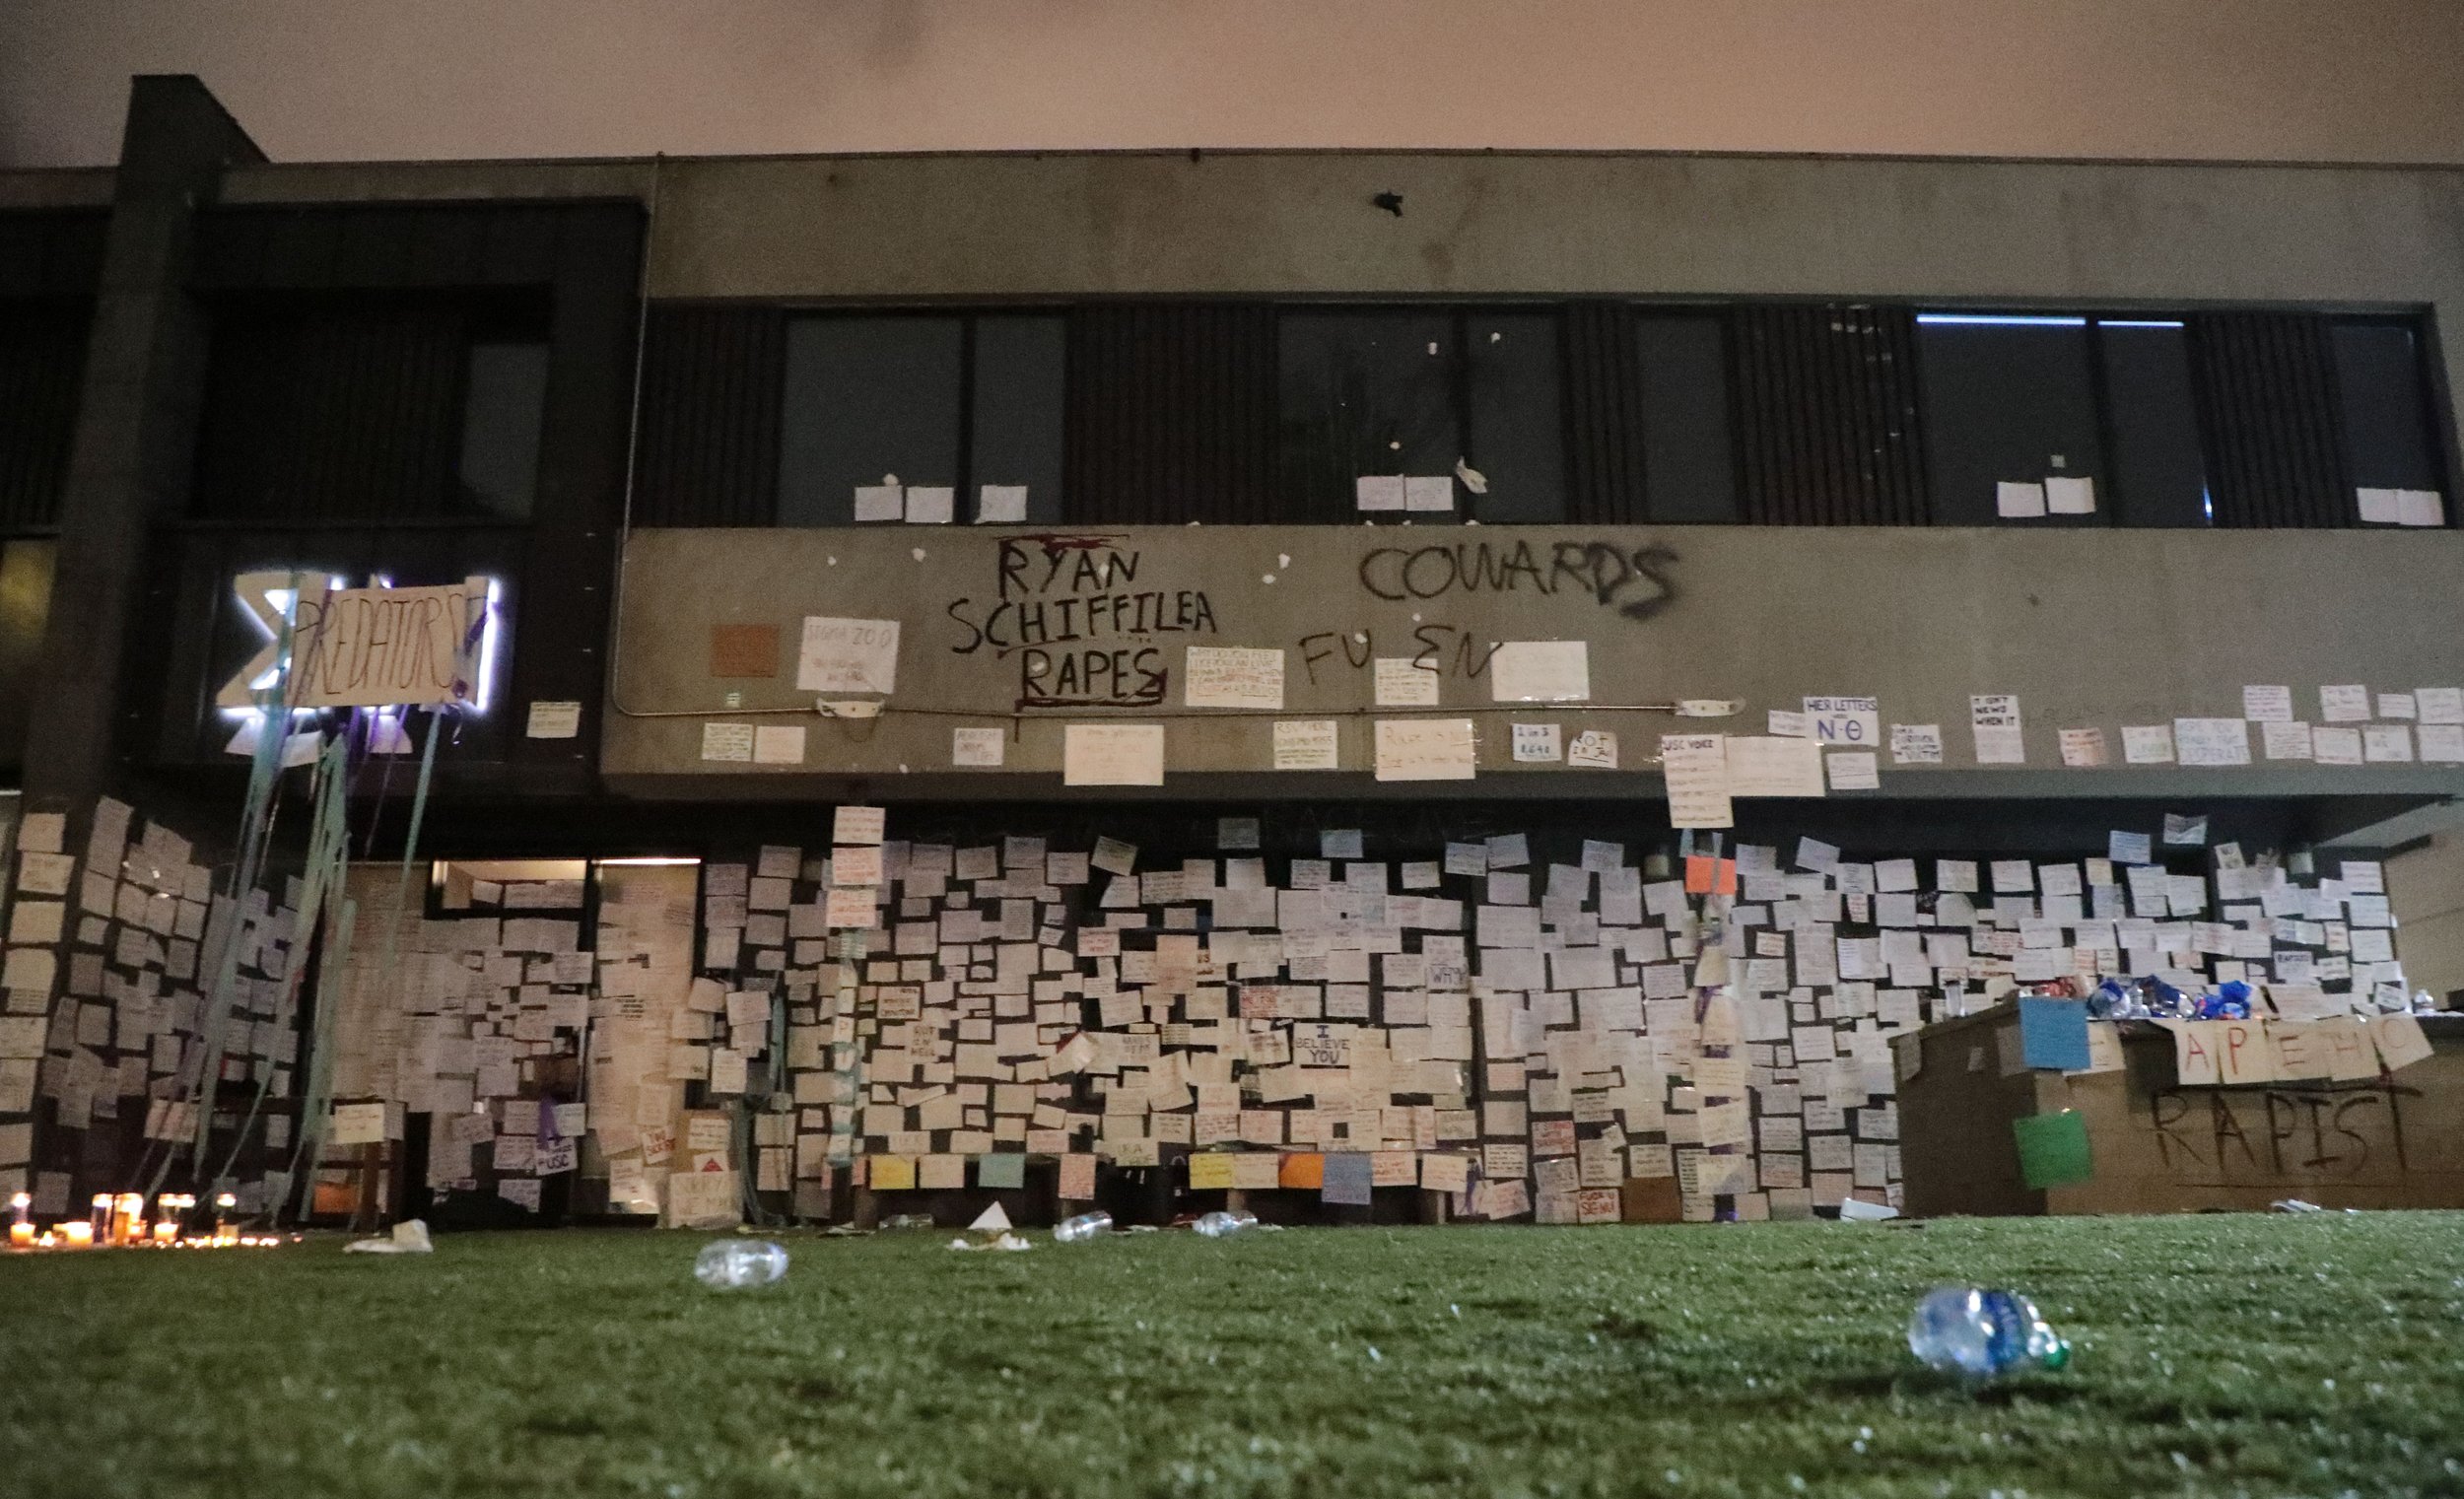  The Sigma Nu Fraternity house on W. 28th Street with handwritten notes of students' experiences with sexual assault at USC on Friday Oct. 22, 2021. (Photo by Yannick Peterhans) 